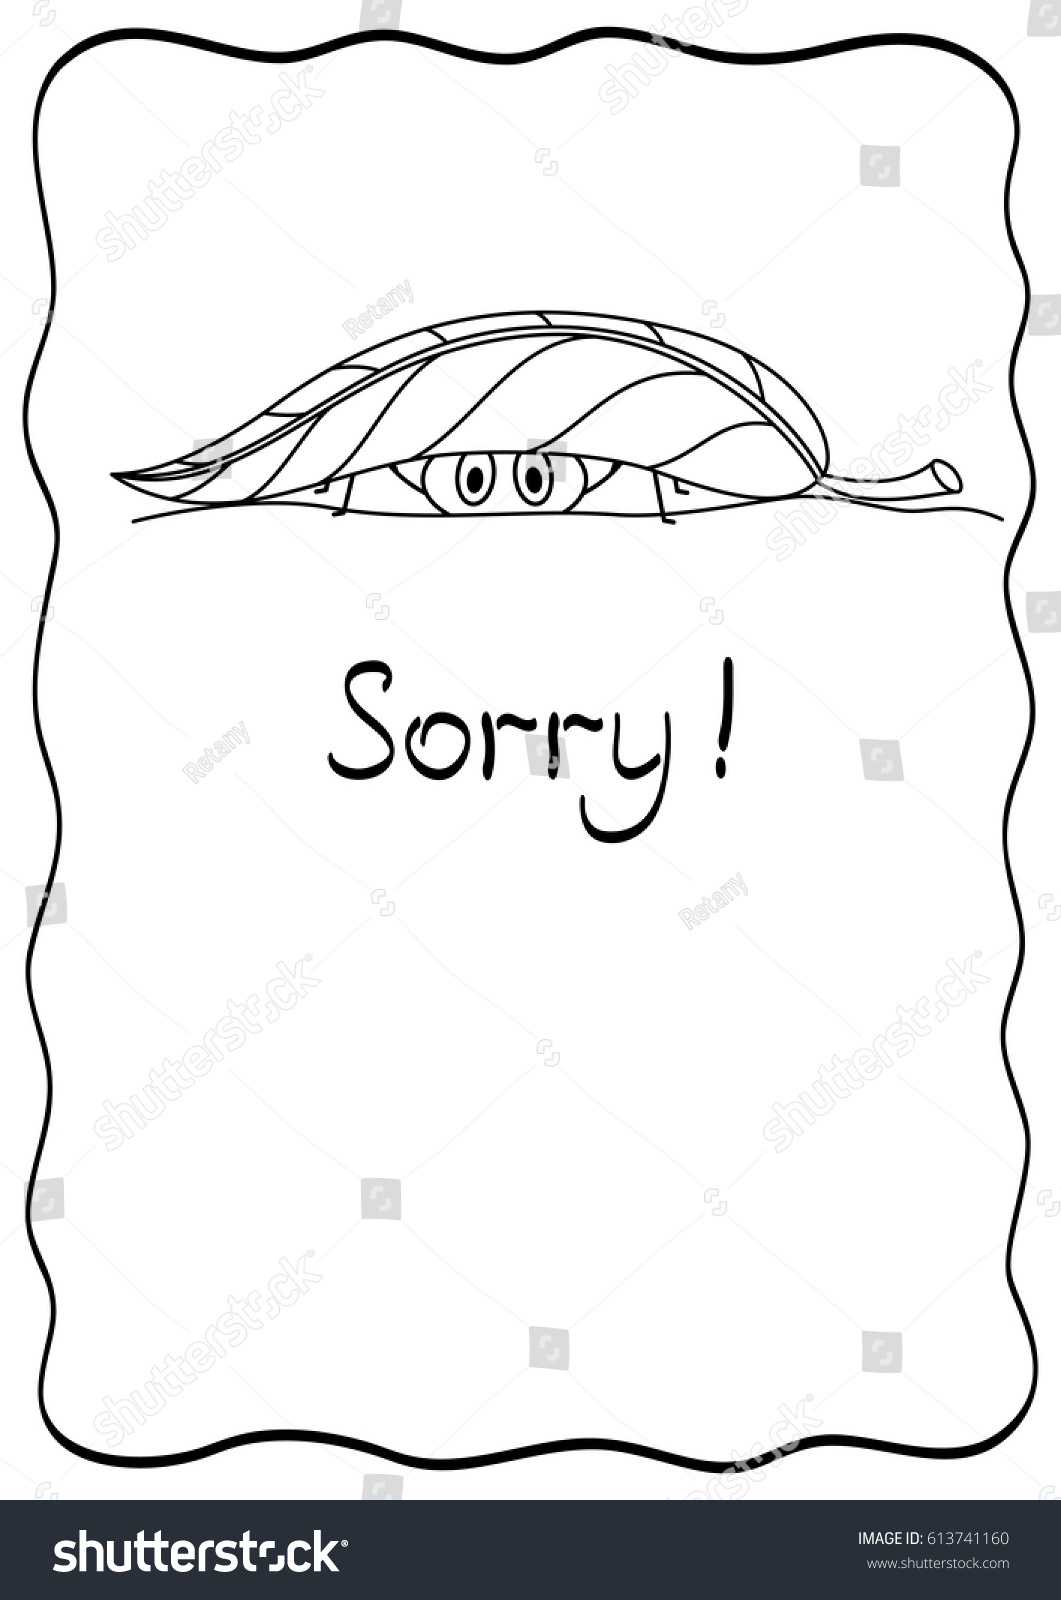 Sorry Comic Postcard Spider Design Template Stock Image Pertaining To Sorry Card Template